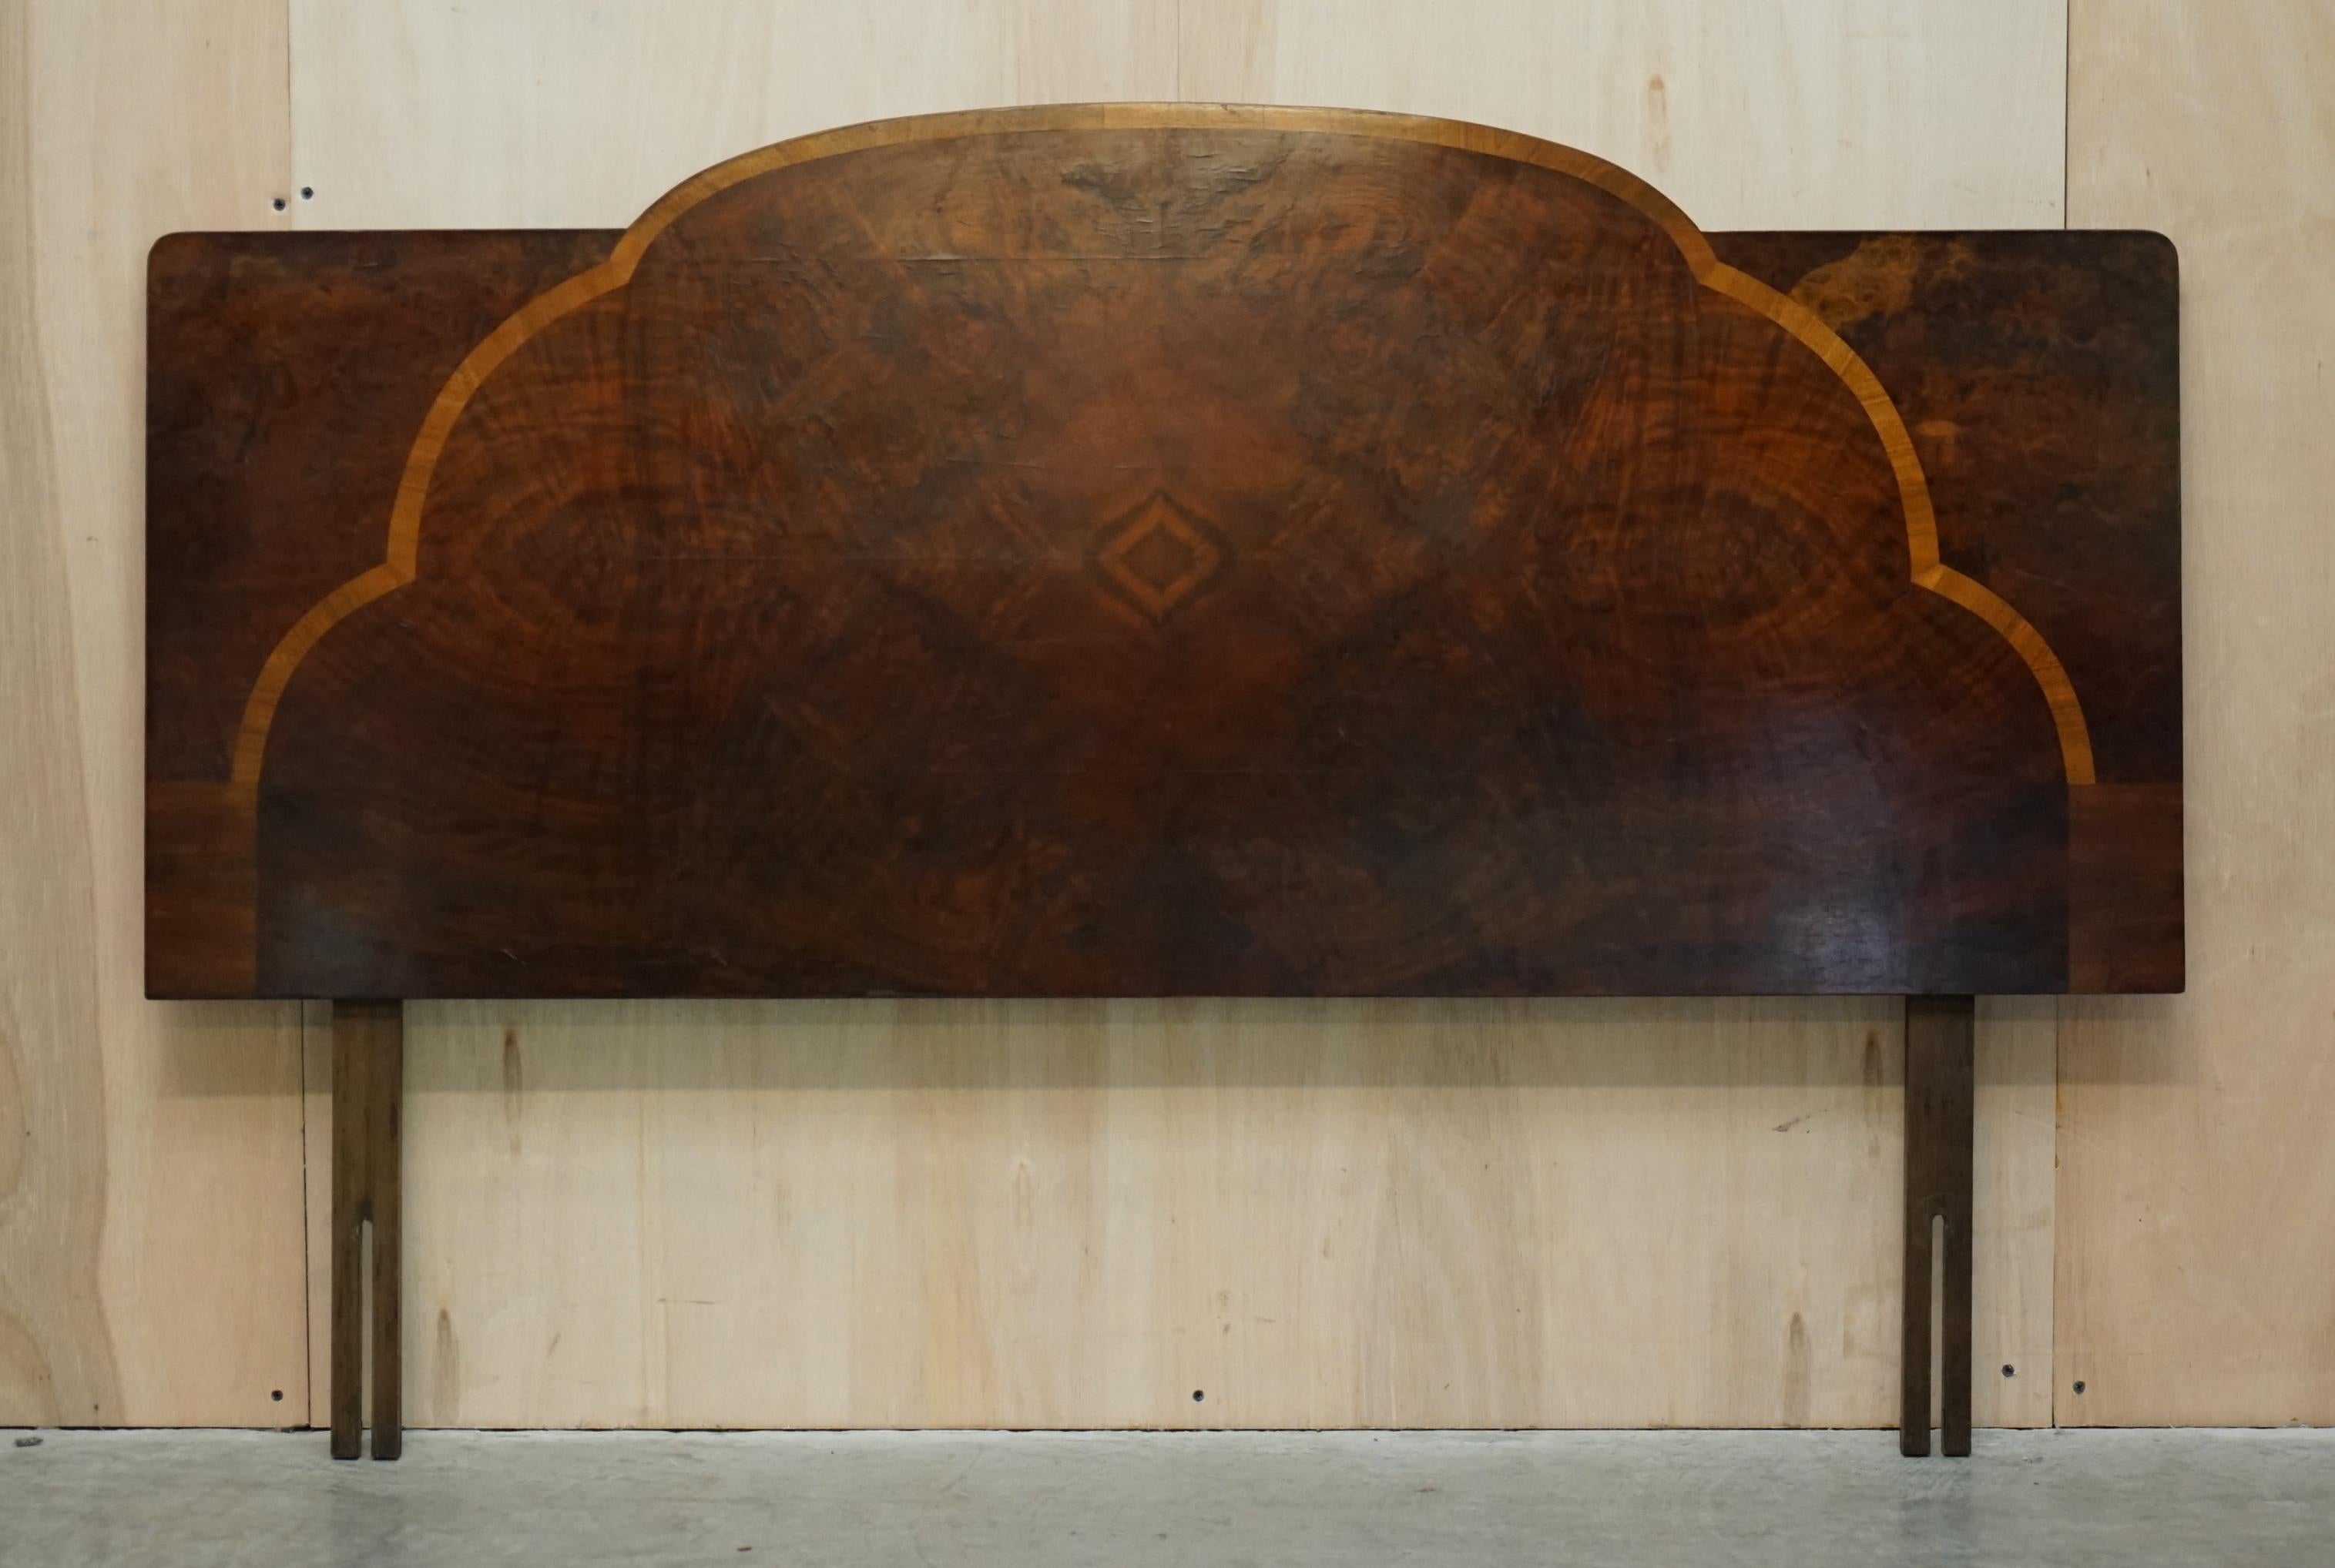 We are delighted to offer for sale this original circa 1920’s Art Deco headboard which is part of a suite

As mentioned this piece is part of a suite, in total I have a his and hers pair of wardrobes, the dressing table, one single side table and